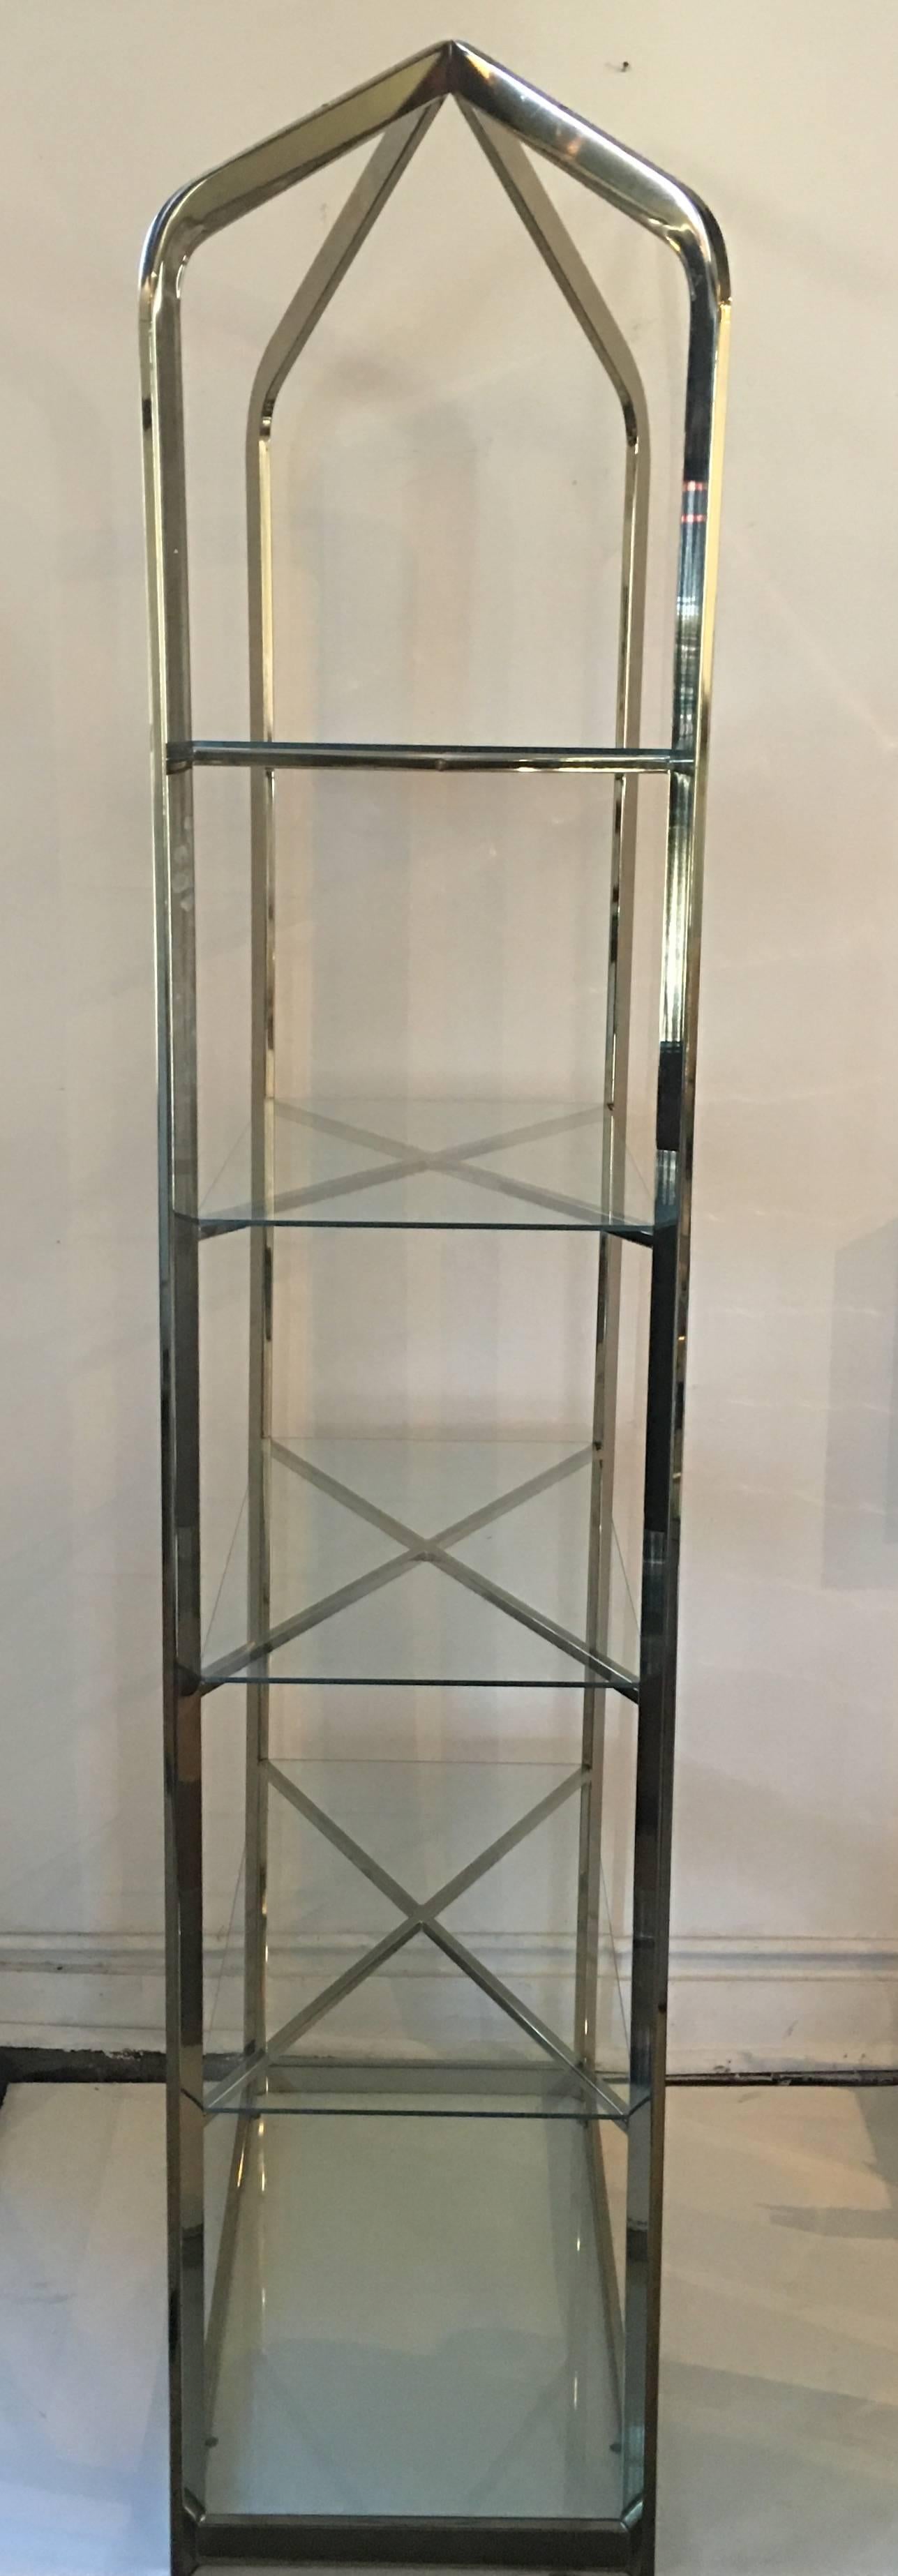 Mid-Century Modern e´tage`re bookcase in the style of Milo Baughman. Brass plated frame supports five removable clear glass shelves.